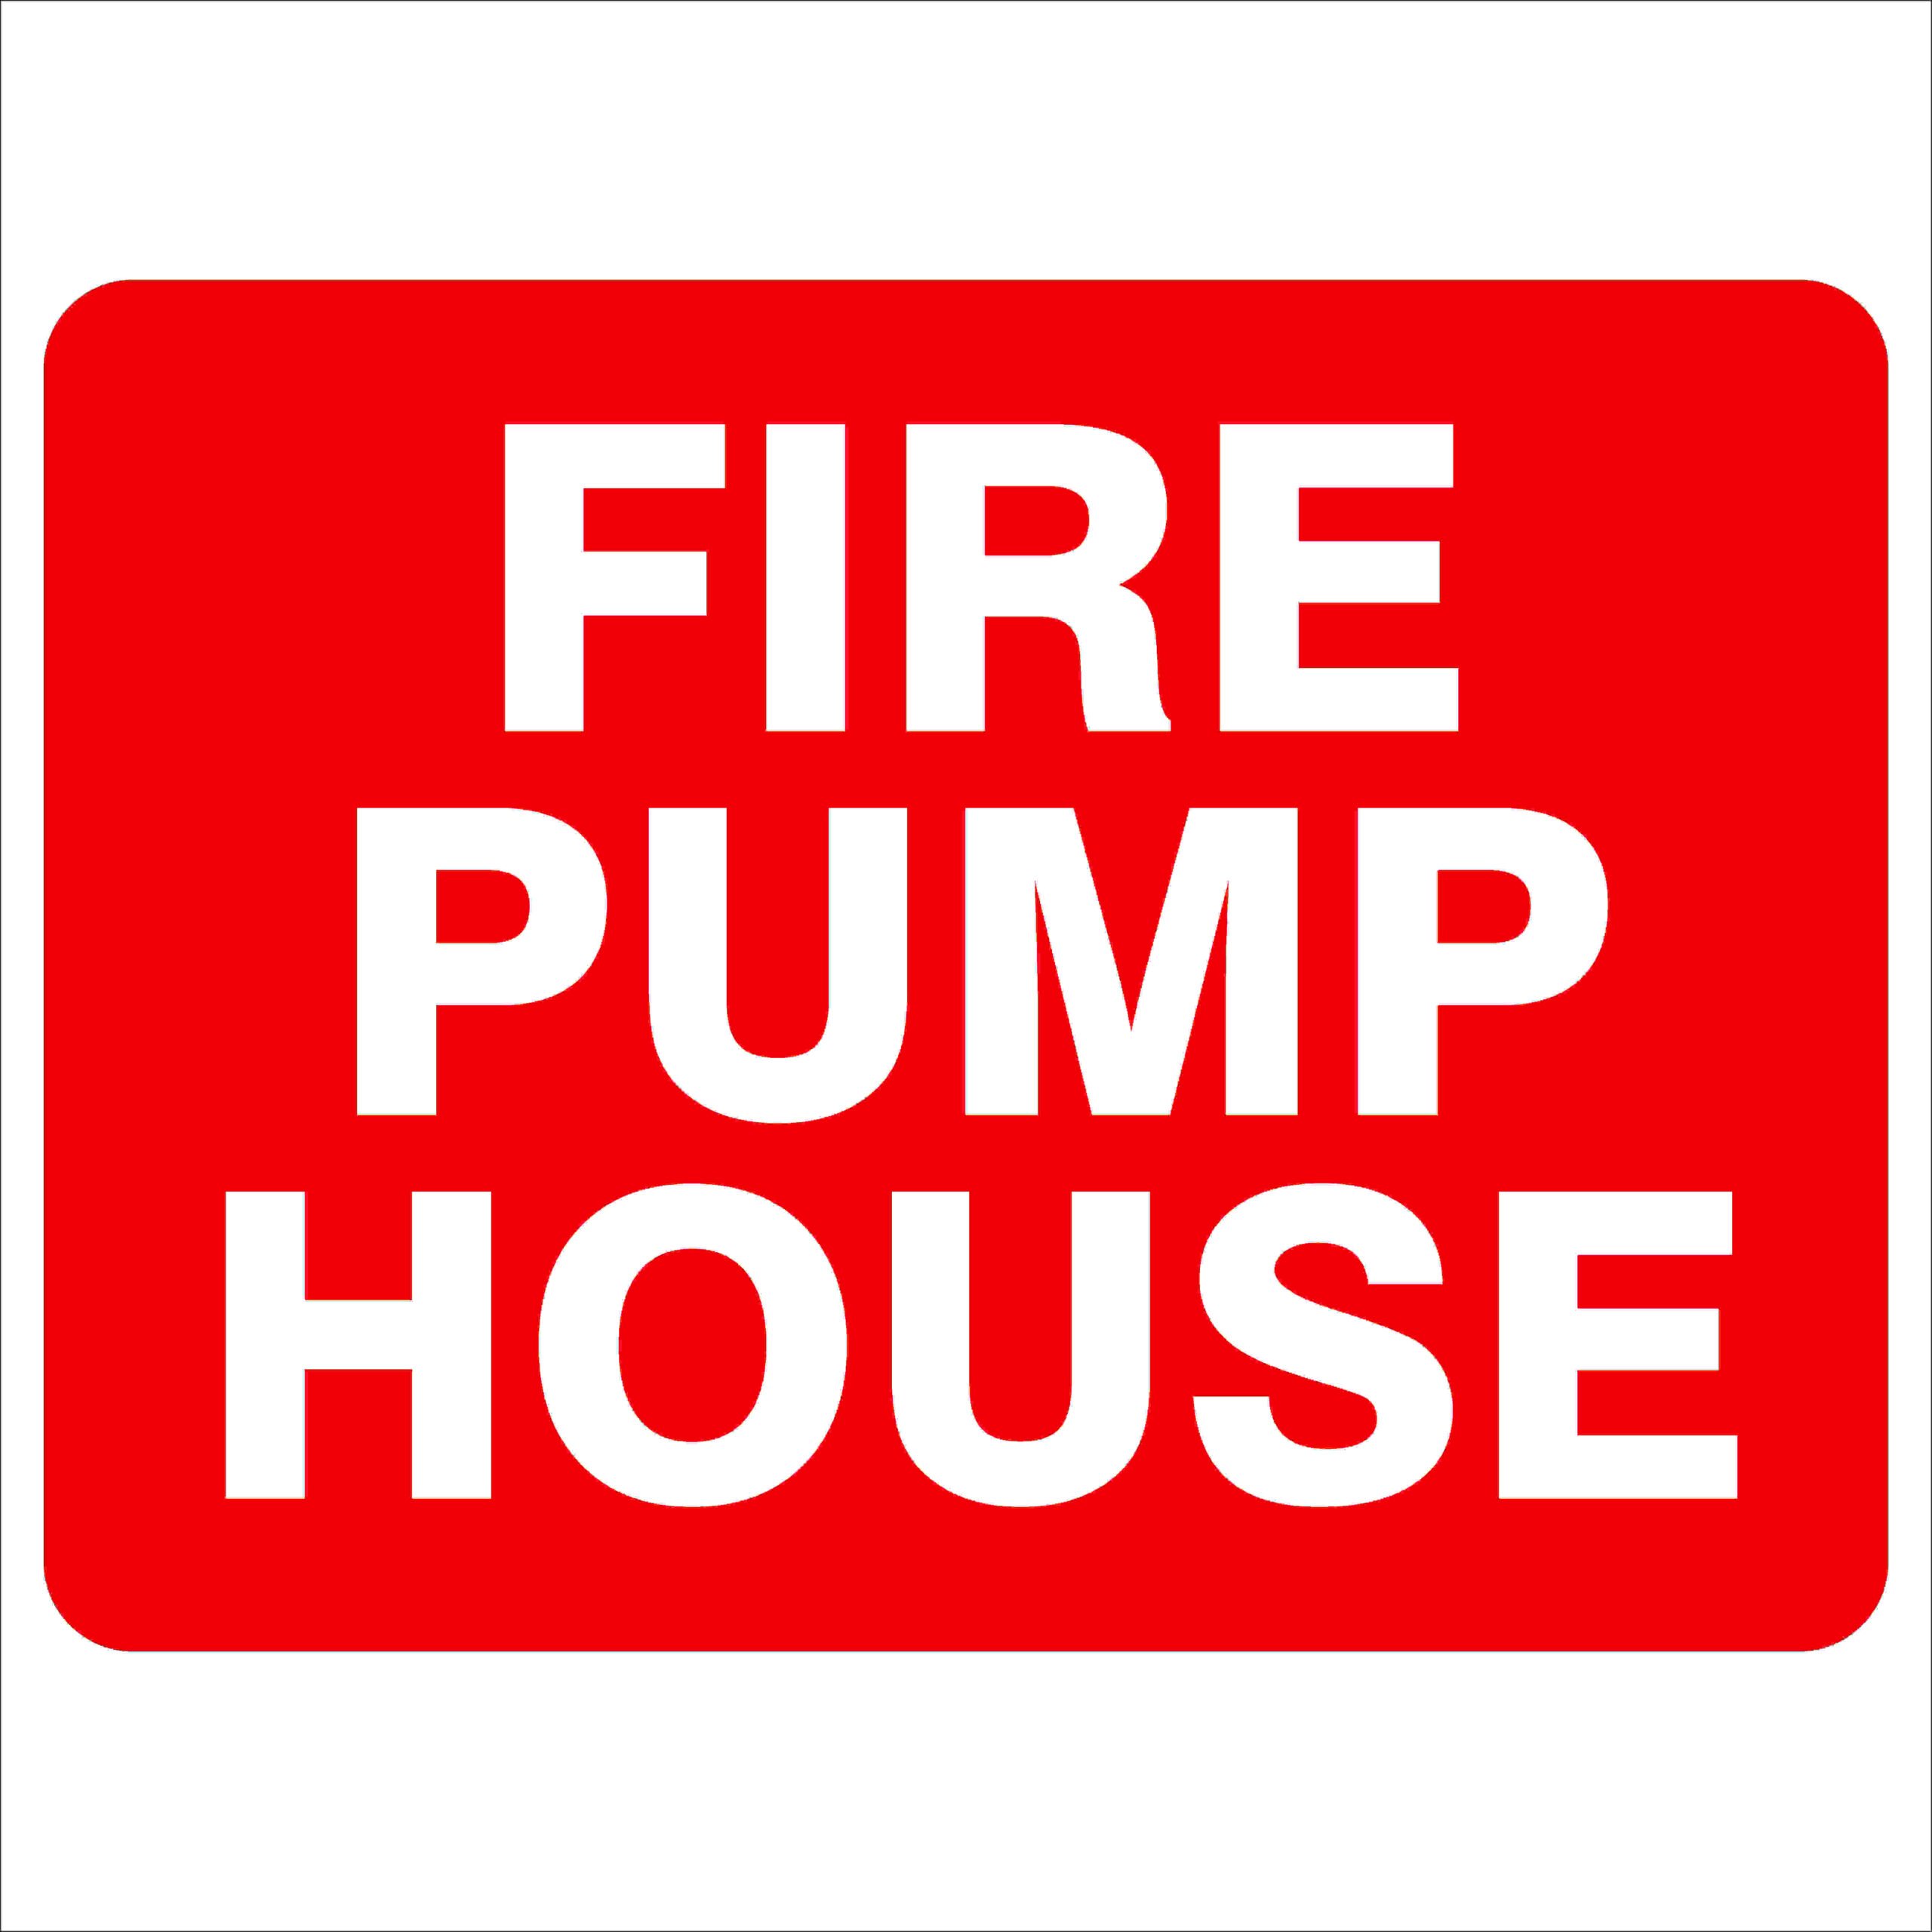 FIRE PUMP HOUSE Fire Safety Signs 